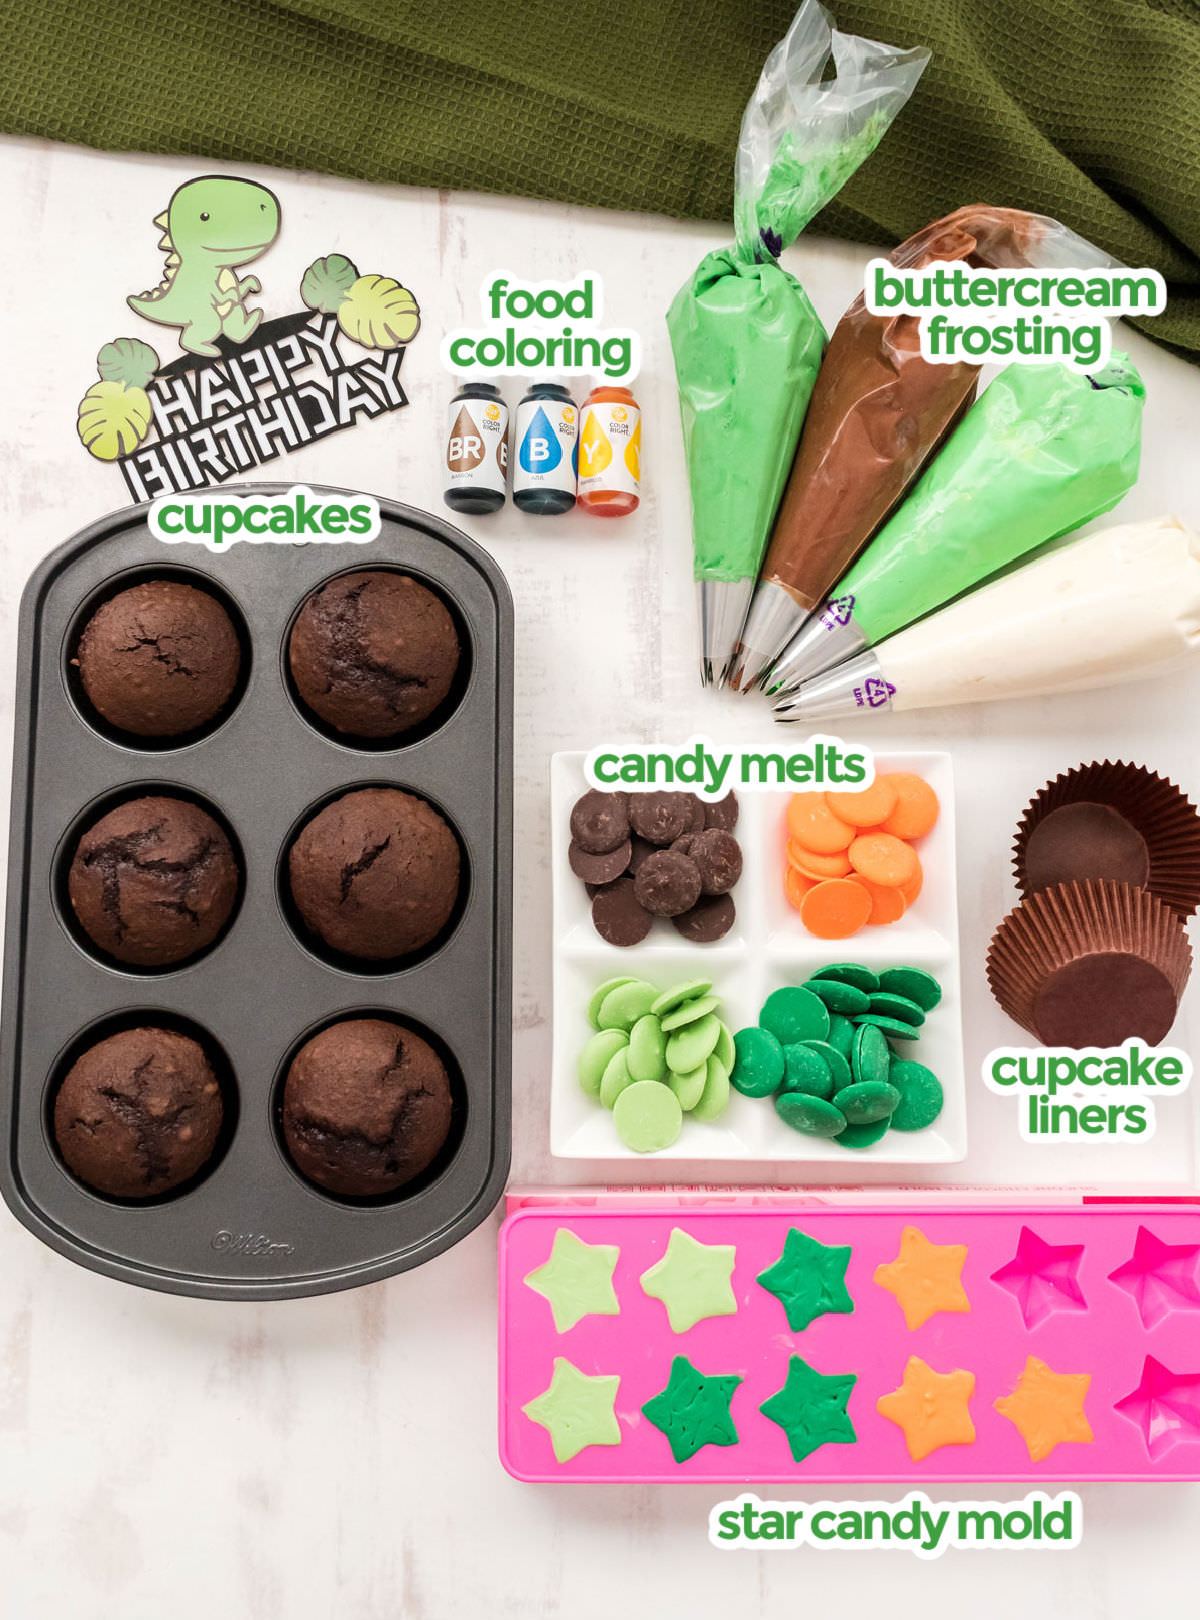 All the ingredients you will need to make Dinosaur Cupcakes including cupcakes, buttercream frosting, candy melts, food coloring and a star candy mold.